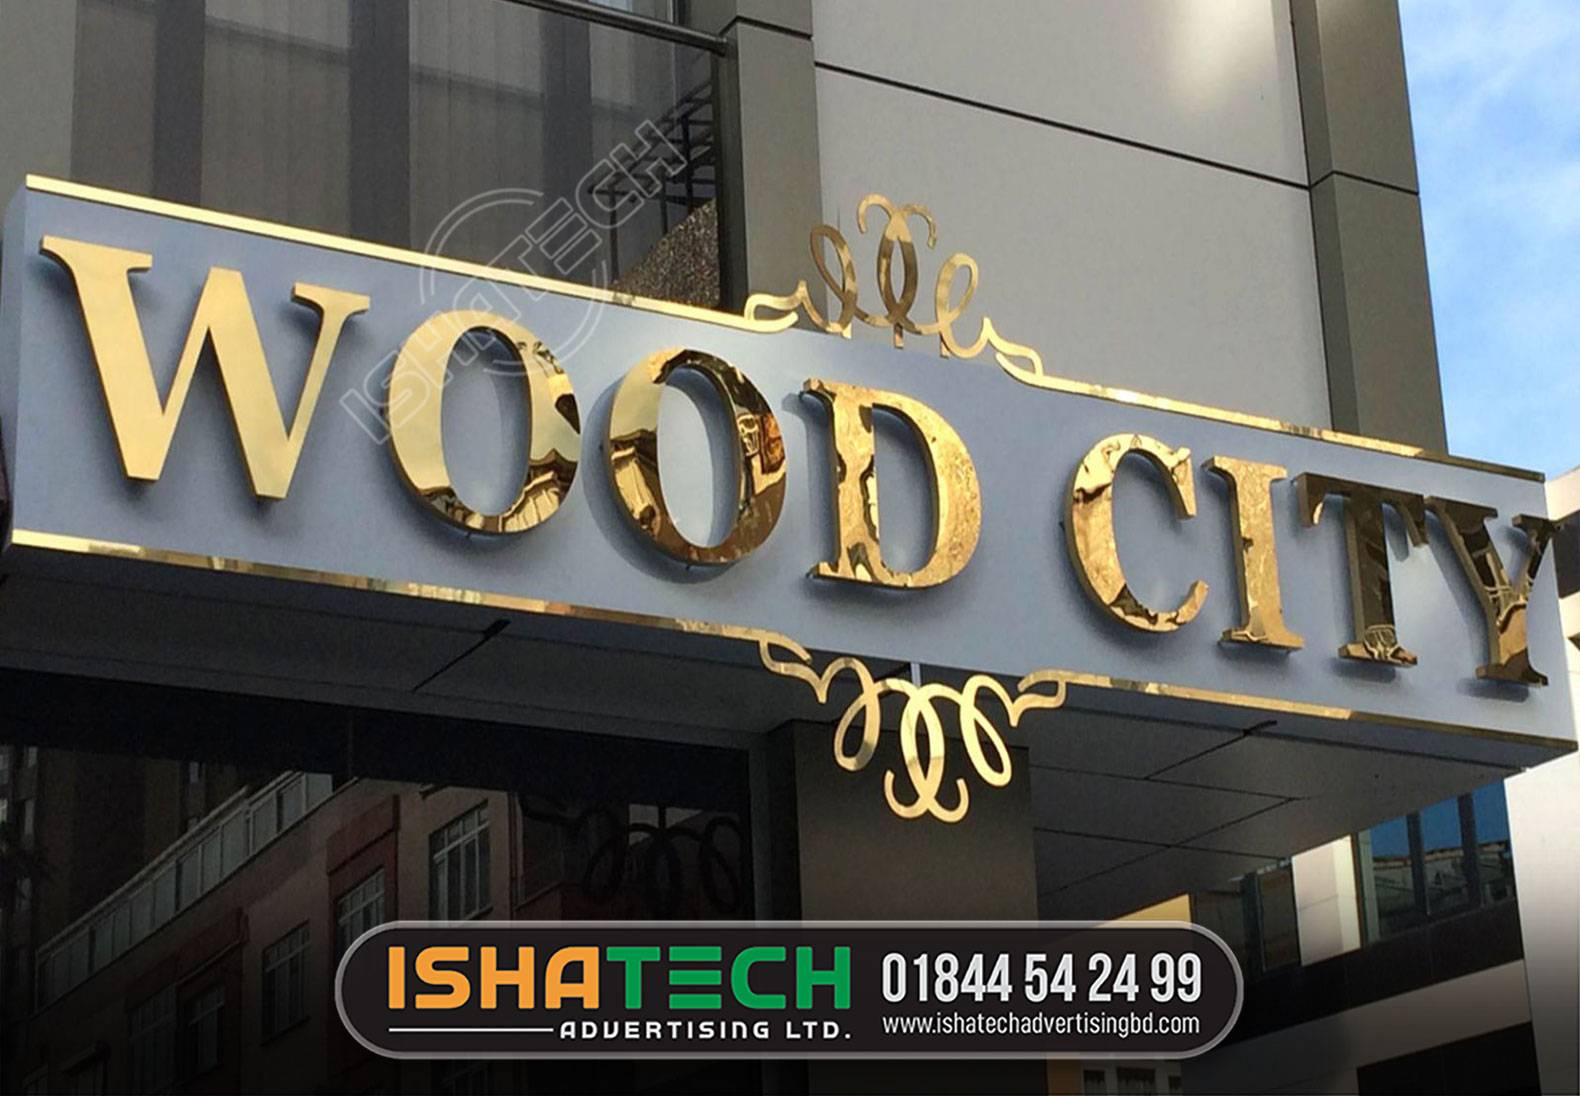 3D GOLDEN GLOSSY 304 STEEL LETTER, FREE professional logo design when customers order the signs with us. Our signs are made from stainless steel which is superb in quality with luxurious look and feel. We can make in any color (metallic gold, silver, rose gold, copper, black etc). FREE shipping for all orders to USA & Canada.